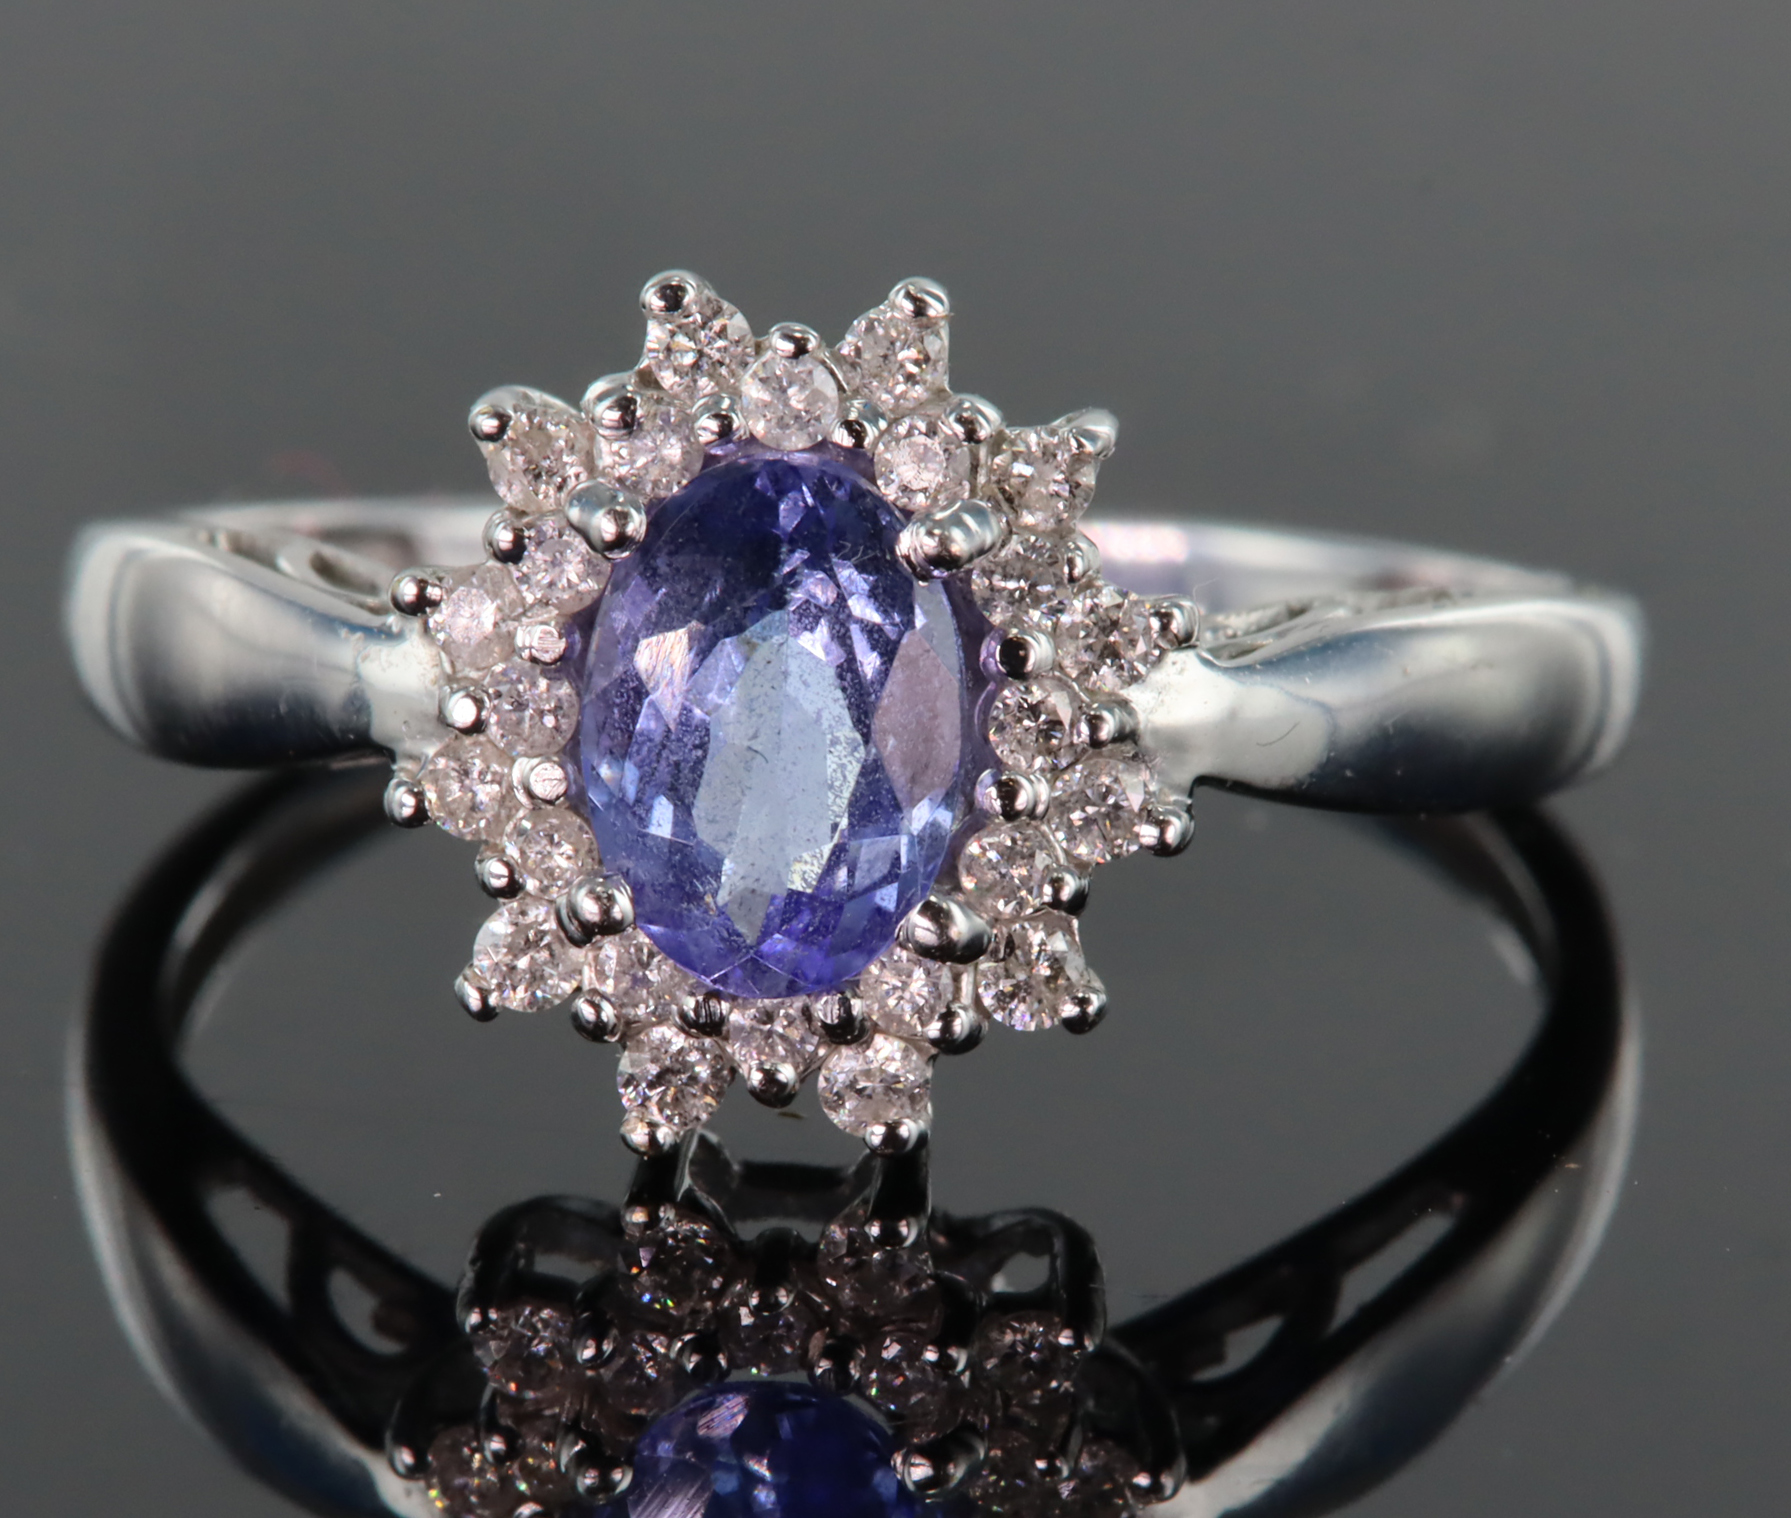 18ct white gold ring set with central oval tanzanite measuring approx. 7mm x 5mm, surrounded by a